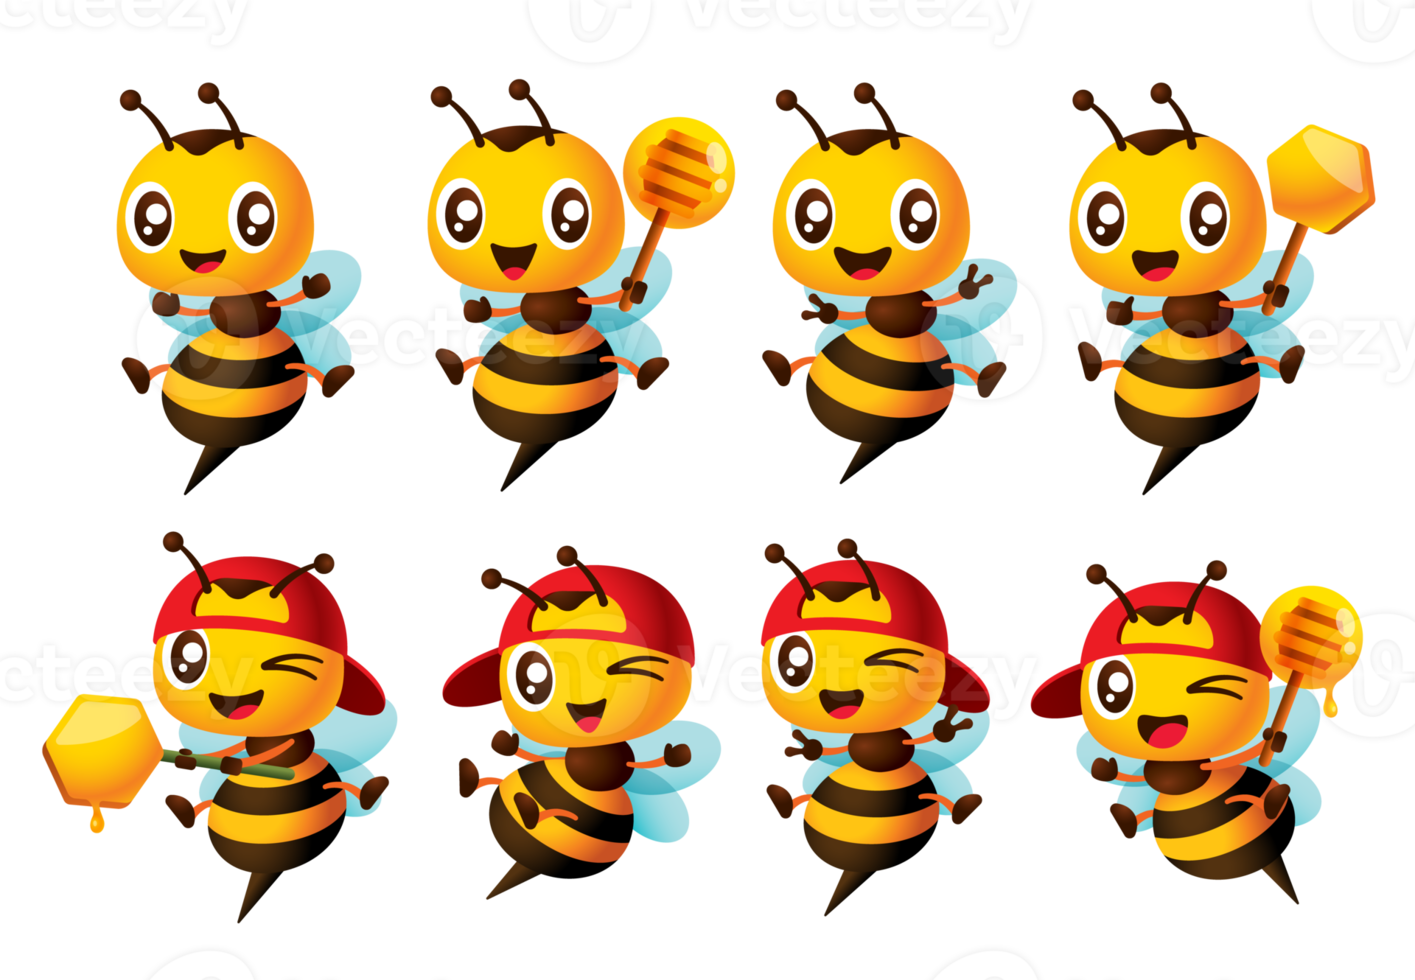 Cartoon cute happy bee character set with different poses. Cute Bee holding honey dripper and honeycomb stick and showing victory hand sign. Bee ultimate mascot illustration set png